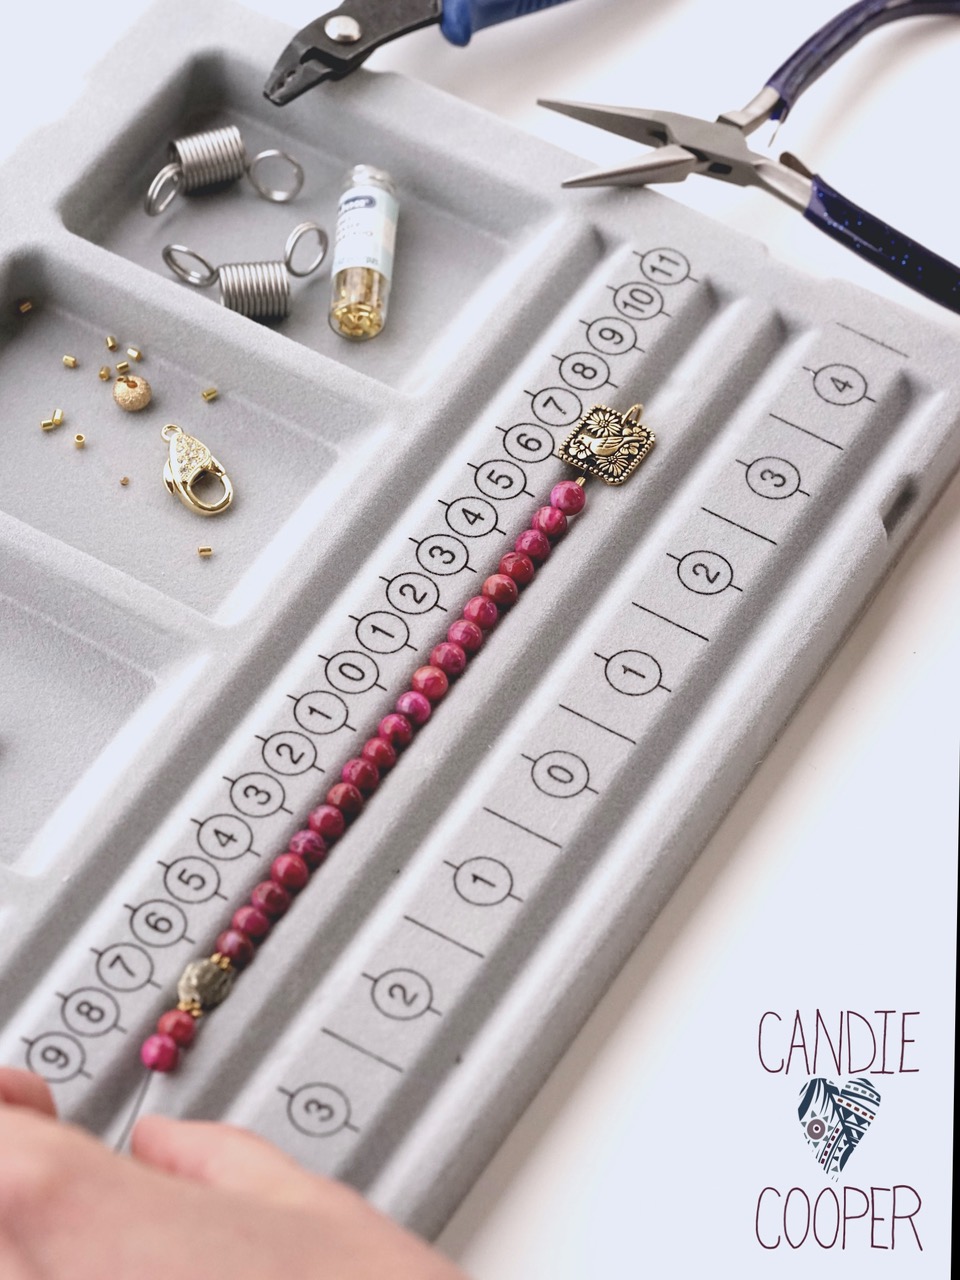 How to use crimp beads - Candie Cooper